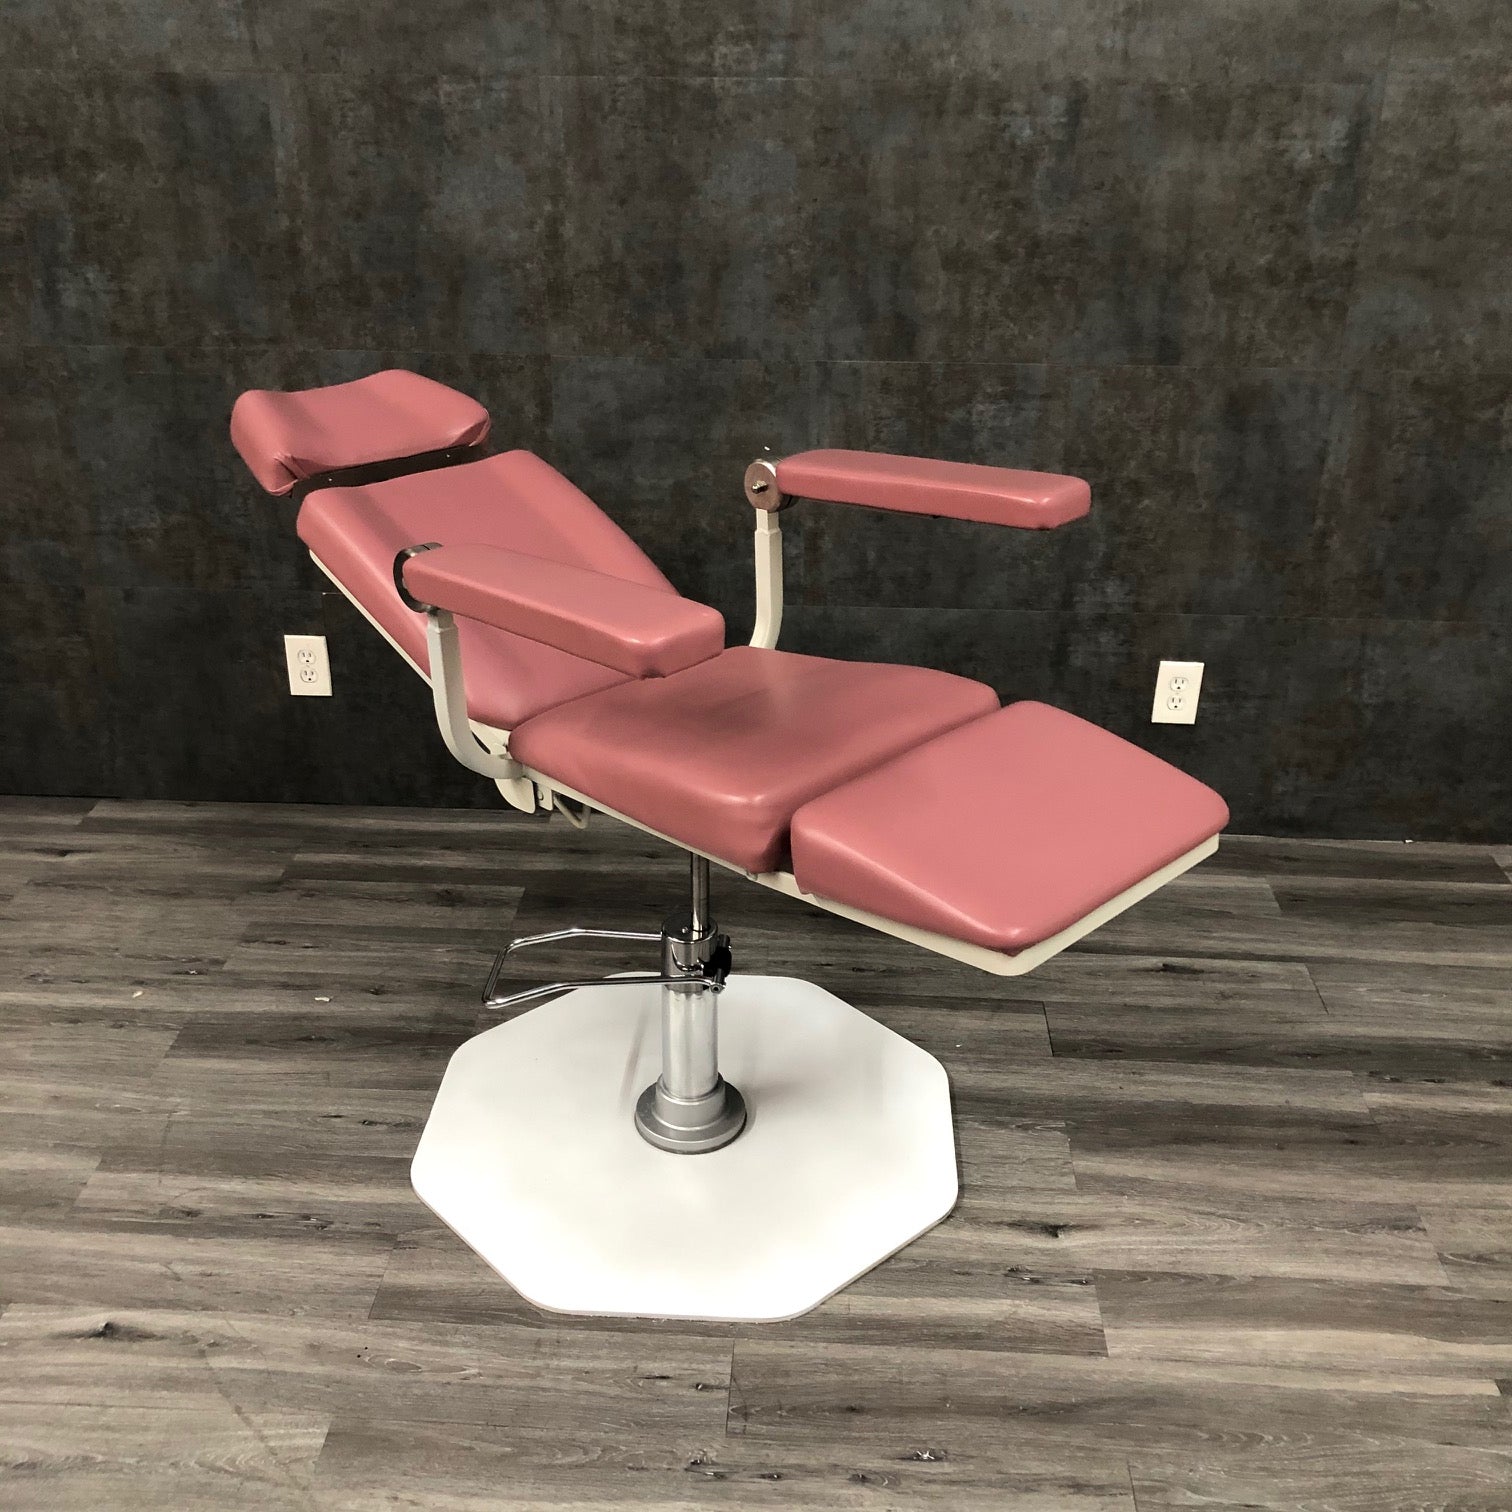 UMF 8612 ENT Exam Chair